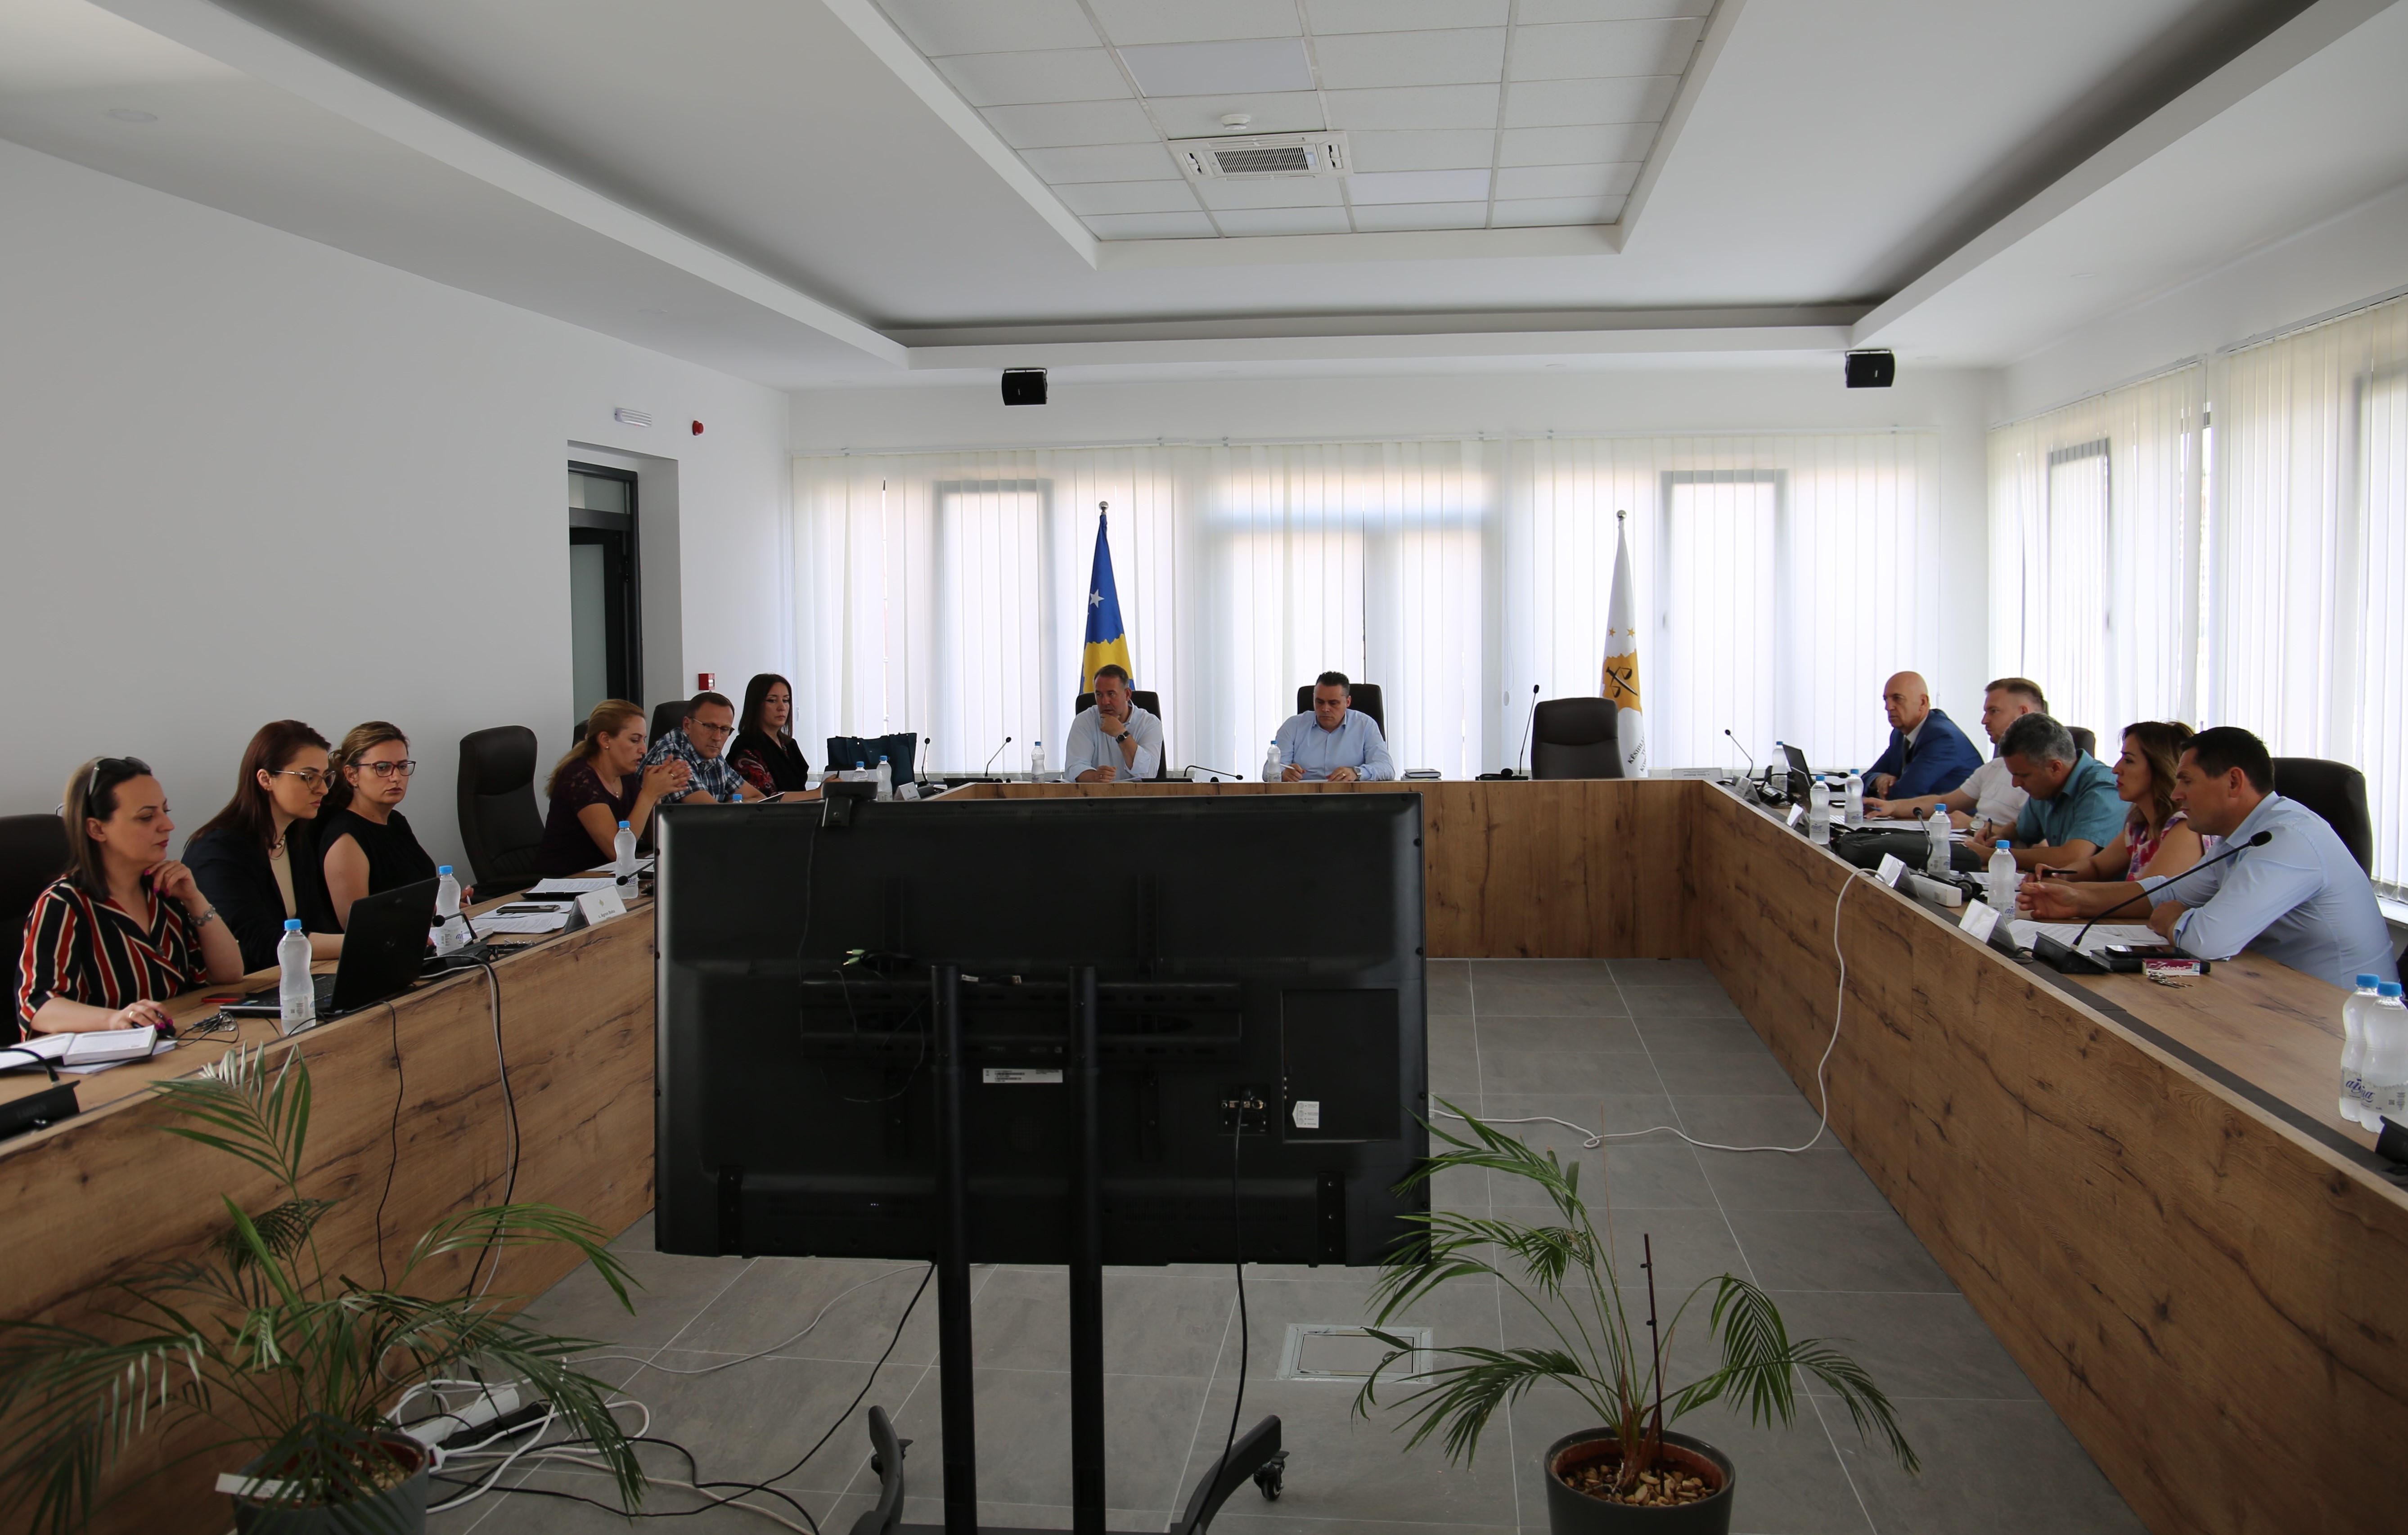 The next meeting of the Commission for Normative Issues is held